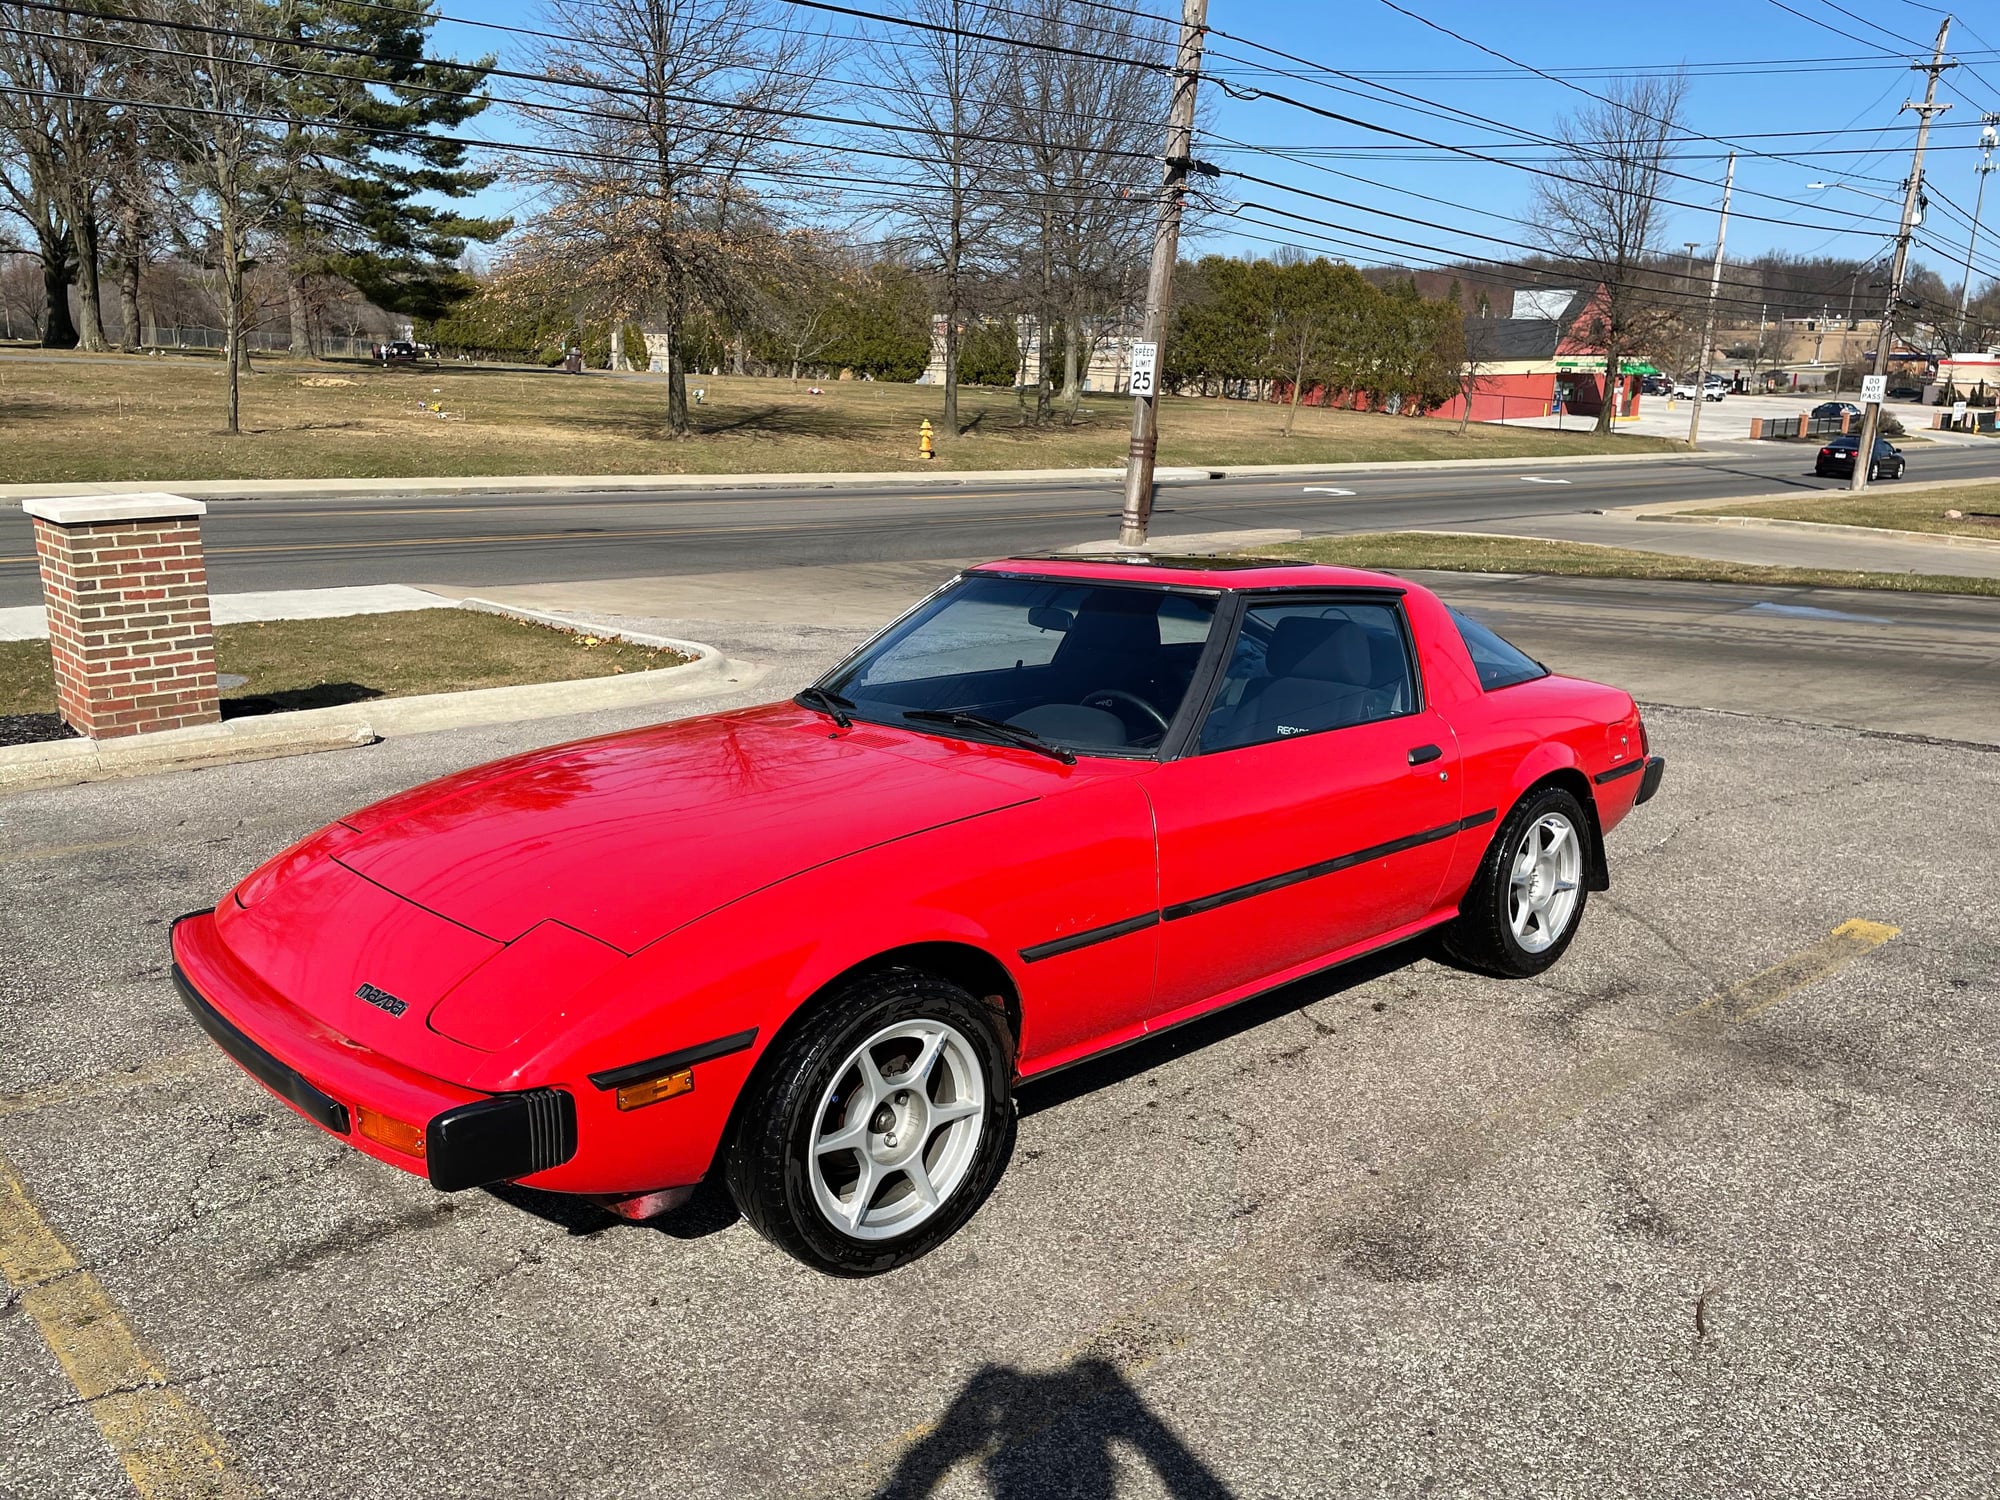 1979 Mazda RX-7 - 1979 Mazda RX-7 - single owner, in great overall shape - Used - Cleveland, OH 44147, United States